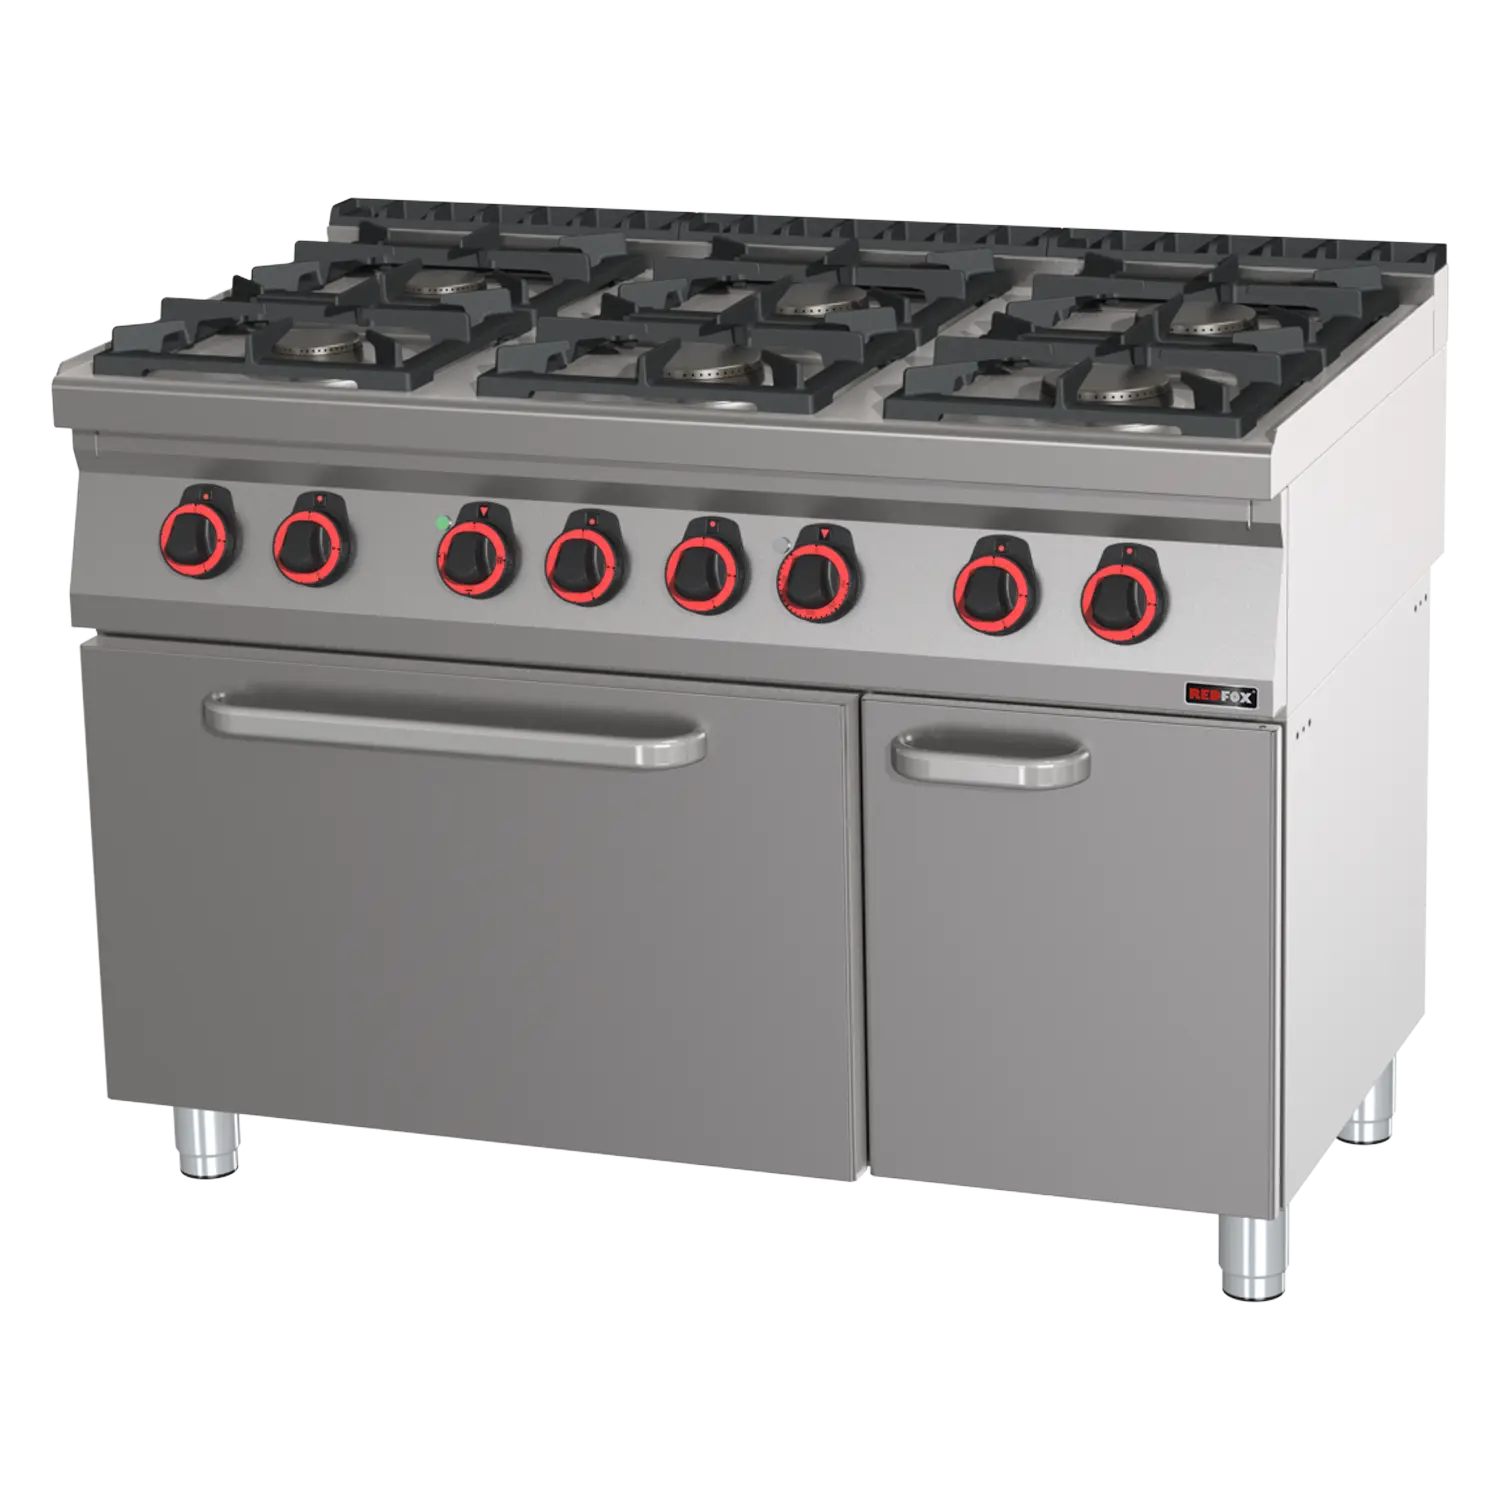 Cooking range combined with static electric oven GN 2/1 - 6x burner ECO  | REDFOX - SPBT 70/120 21 GE